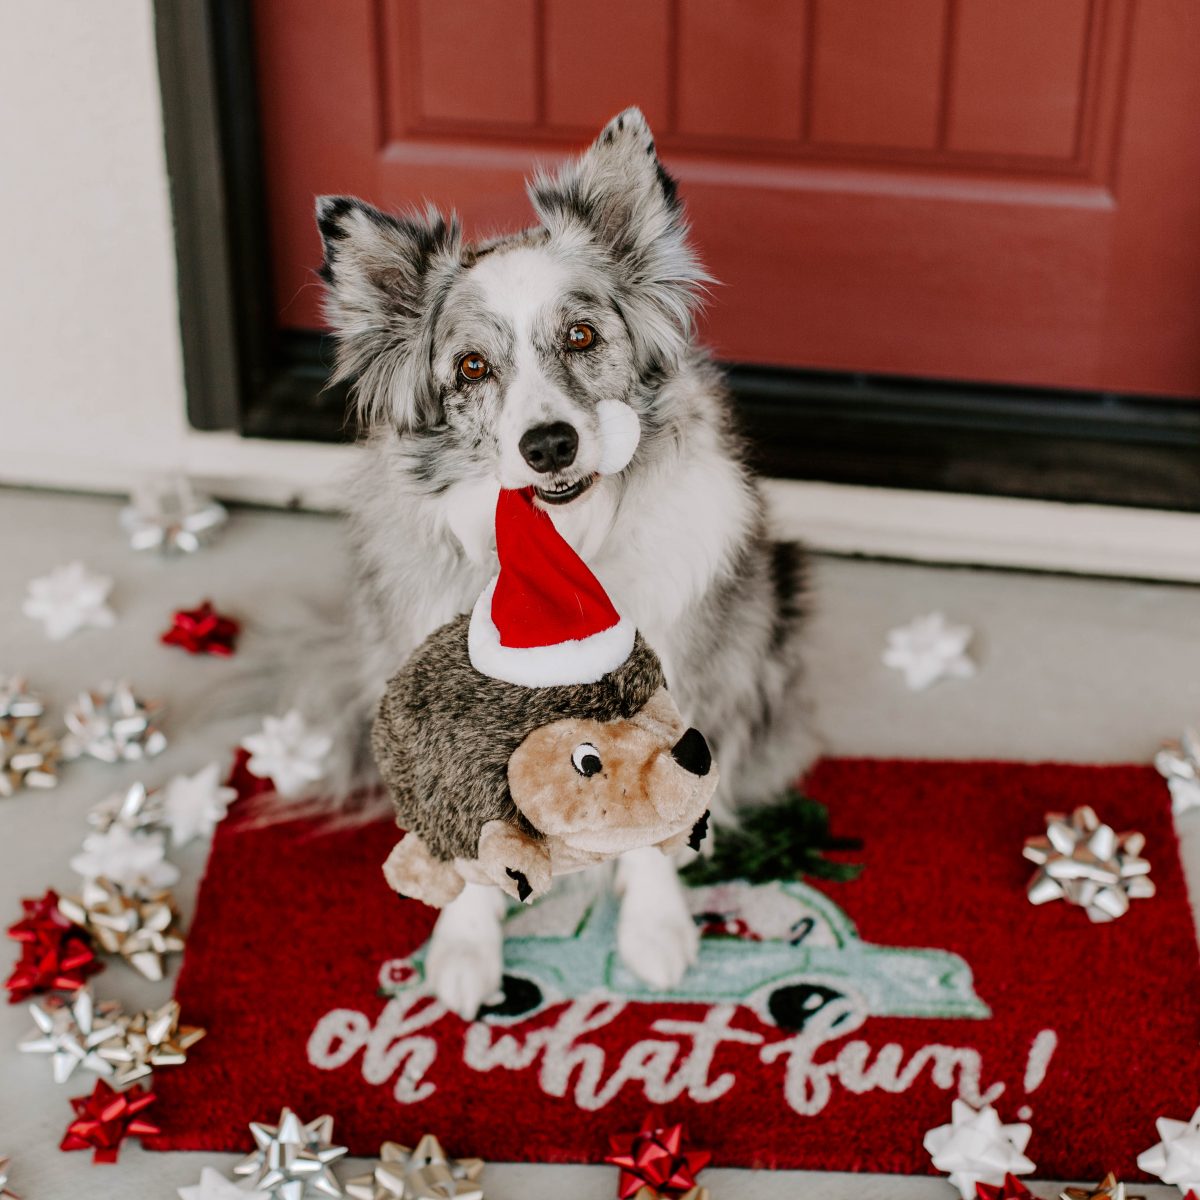 2022 Holiday Gift Guide: Christmas Gifts for Dogs